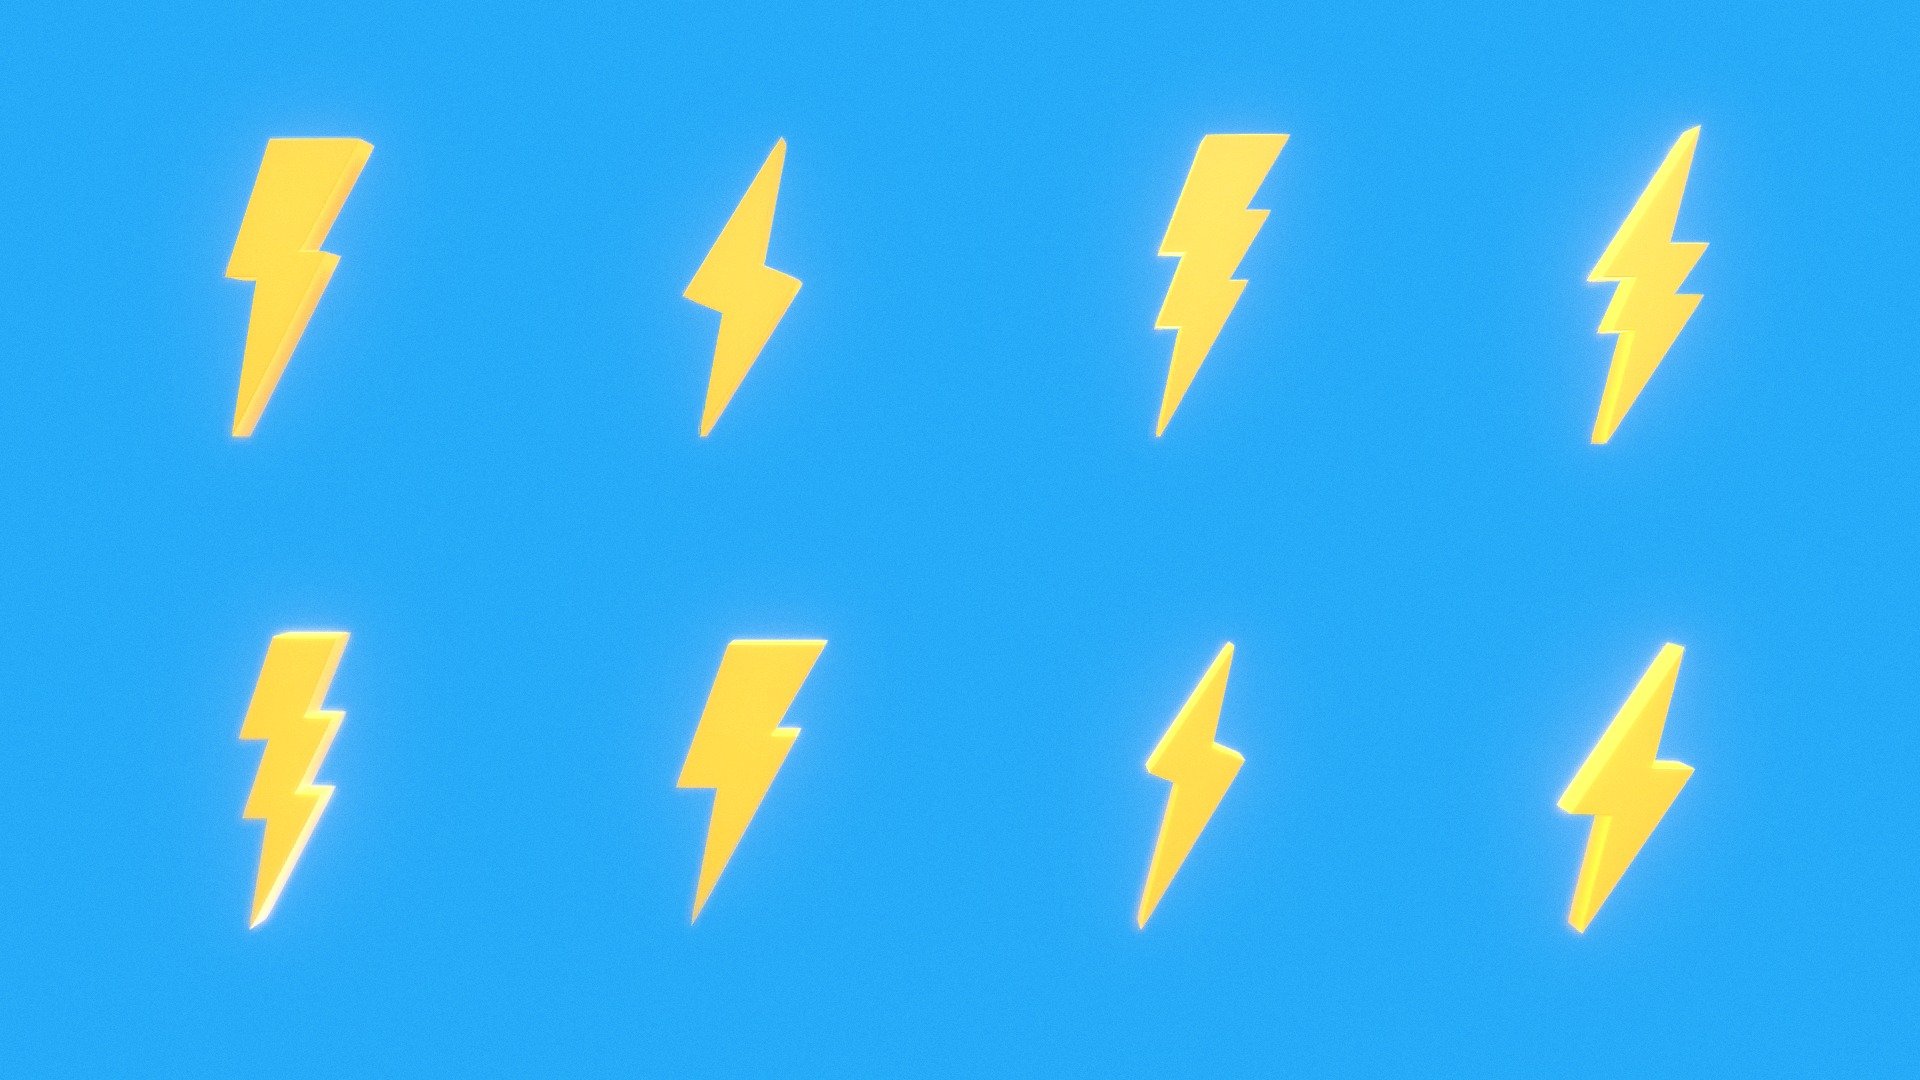 Lightning bolt symbol, aka thunderbolt text emoticon is used to convey things that may be shocking either electrically, or in a metaphorical sense. Lightning emoticon is even used to convey &ldquo;lightning fast speed